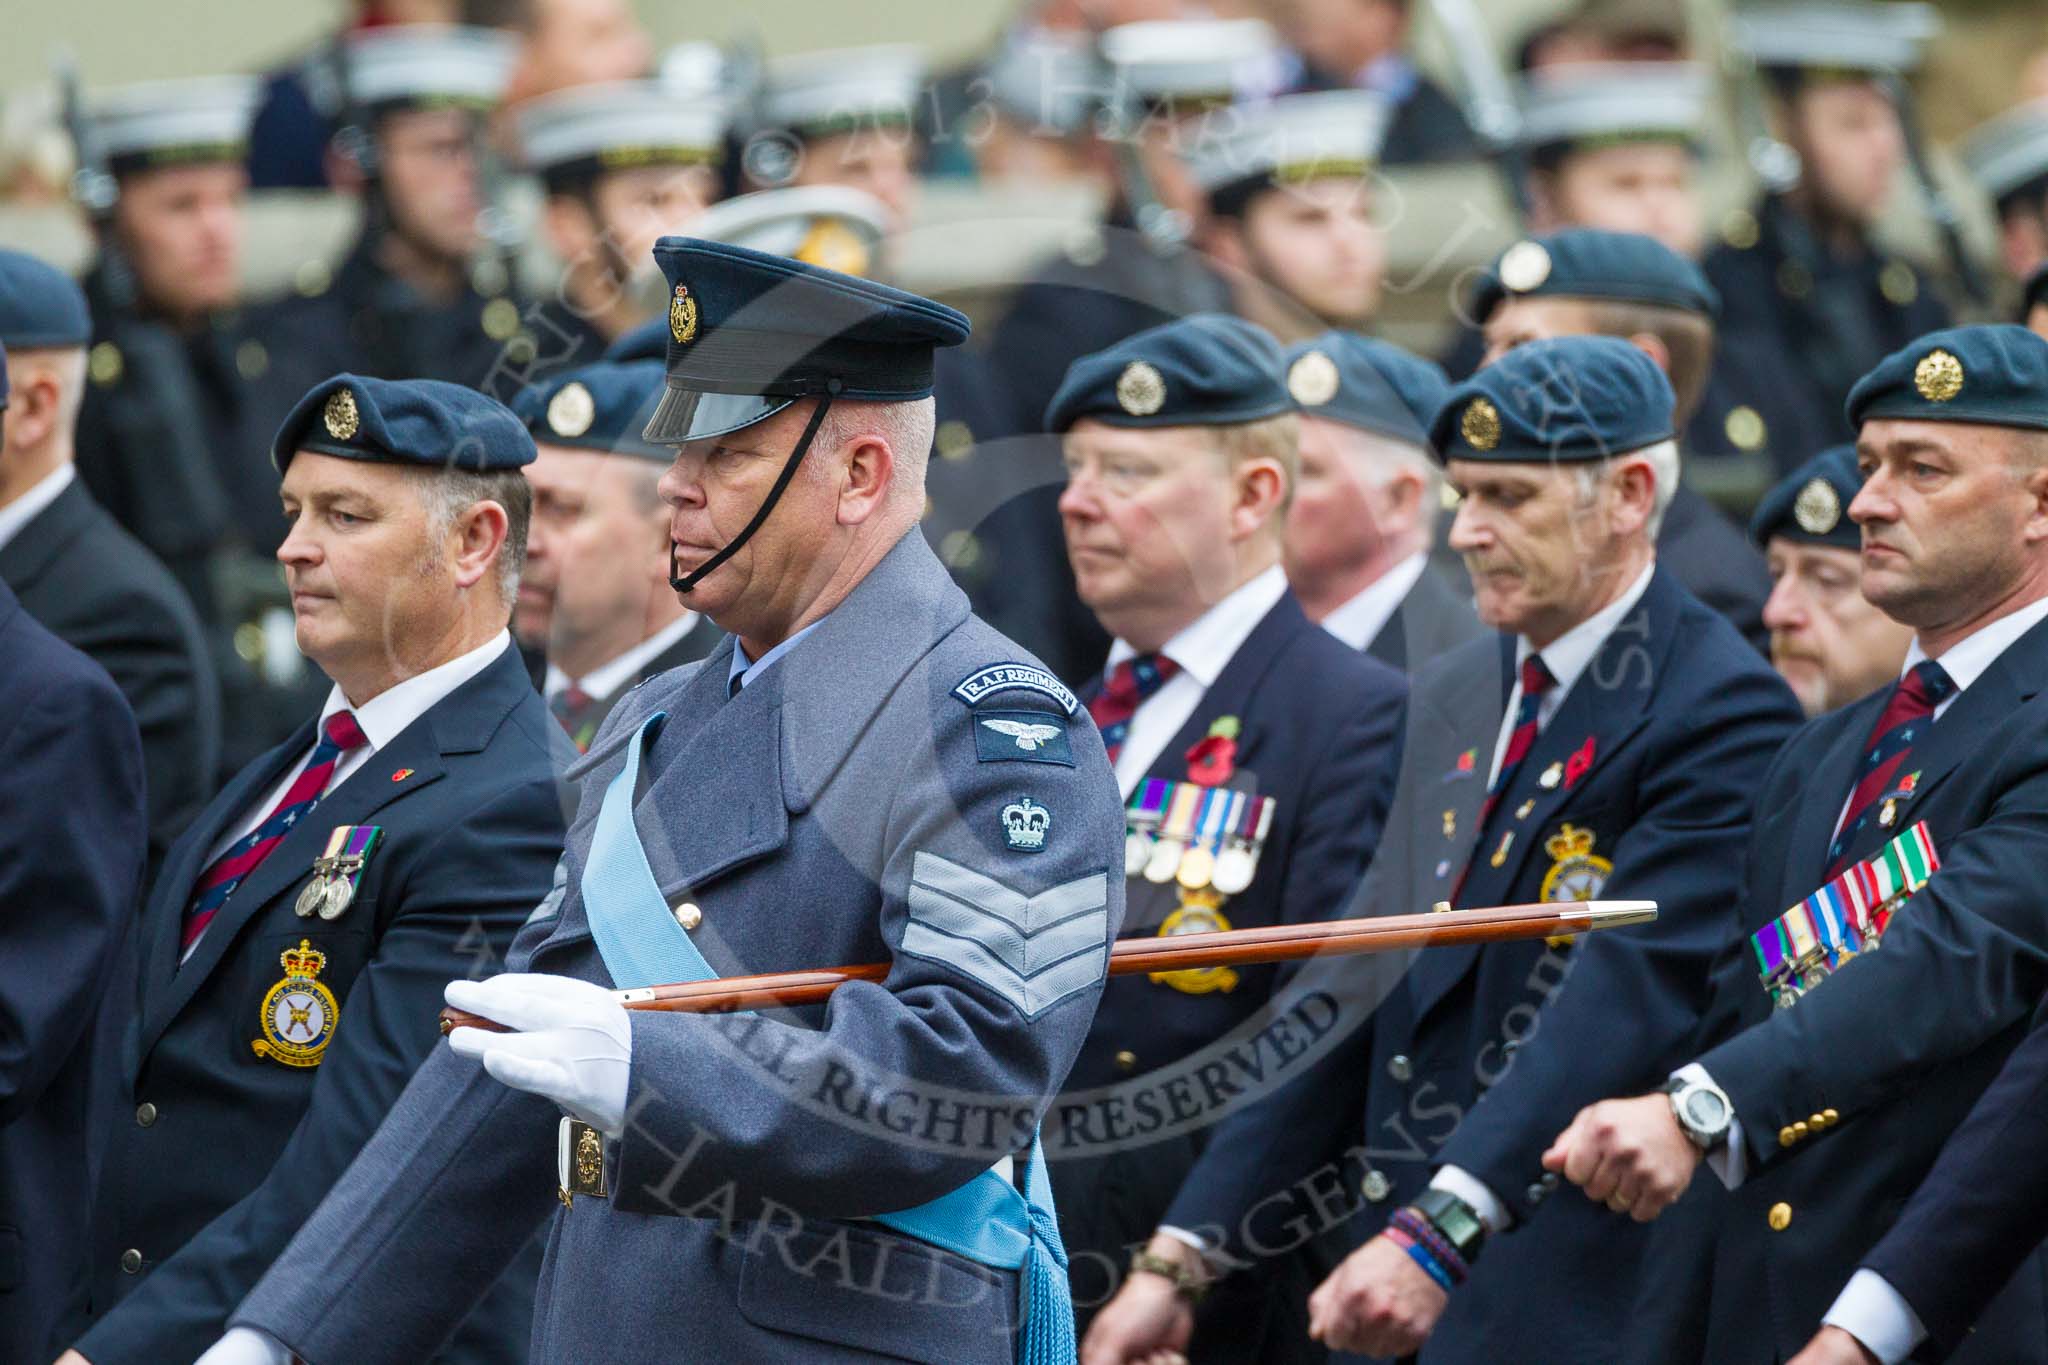 Remembrance Sunday at the Cenotaph 2015: C2, Royal Air Force Regiment Association.
Cenotaph, Whitehall, London SW1,
London,
Greater London,
United Kingdom,
on 08 November 2015 at 11:47, image #415